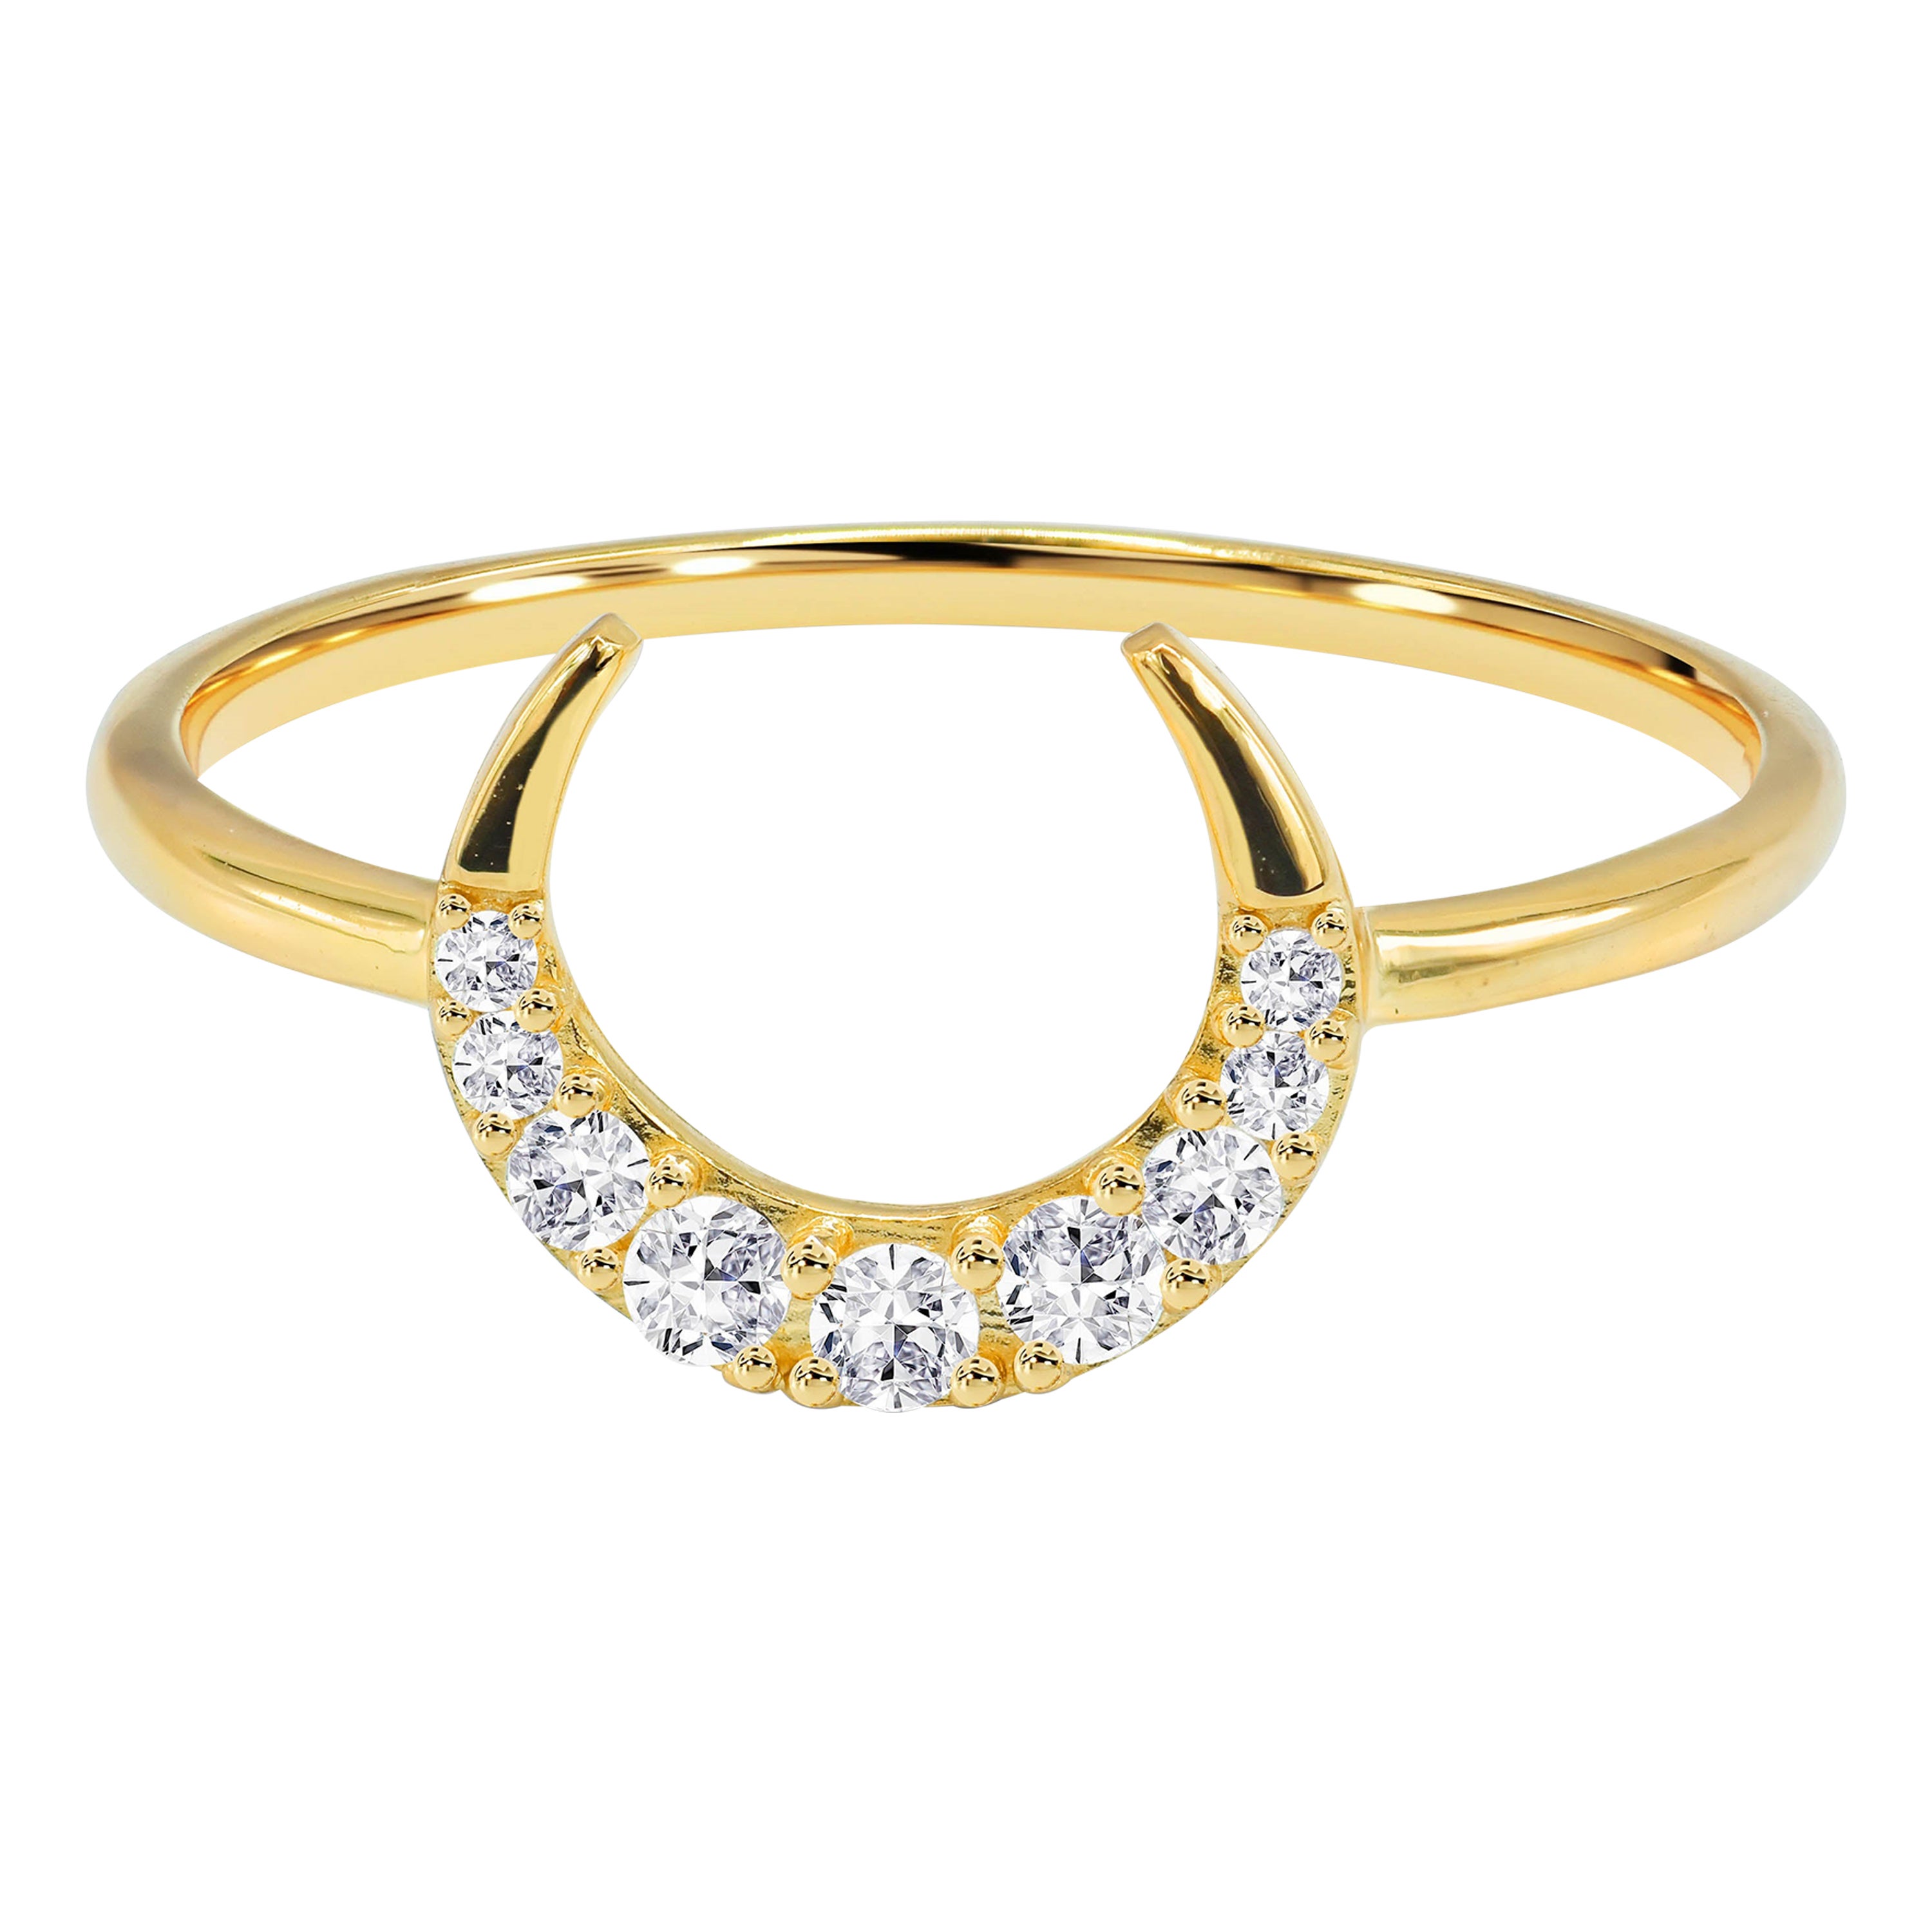 0.19 Ct Diamond Crescent Moon Ring in 14K Gold